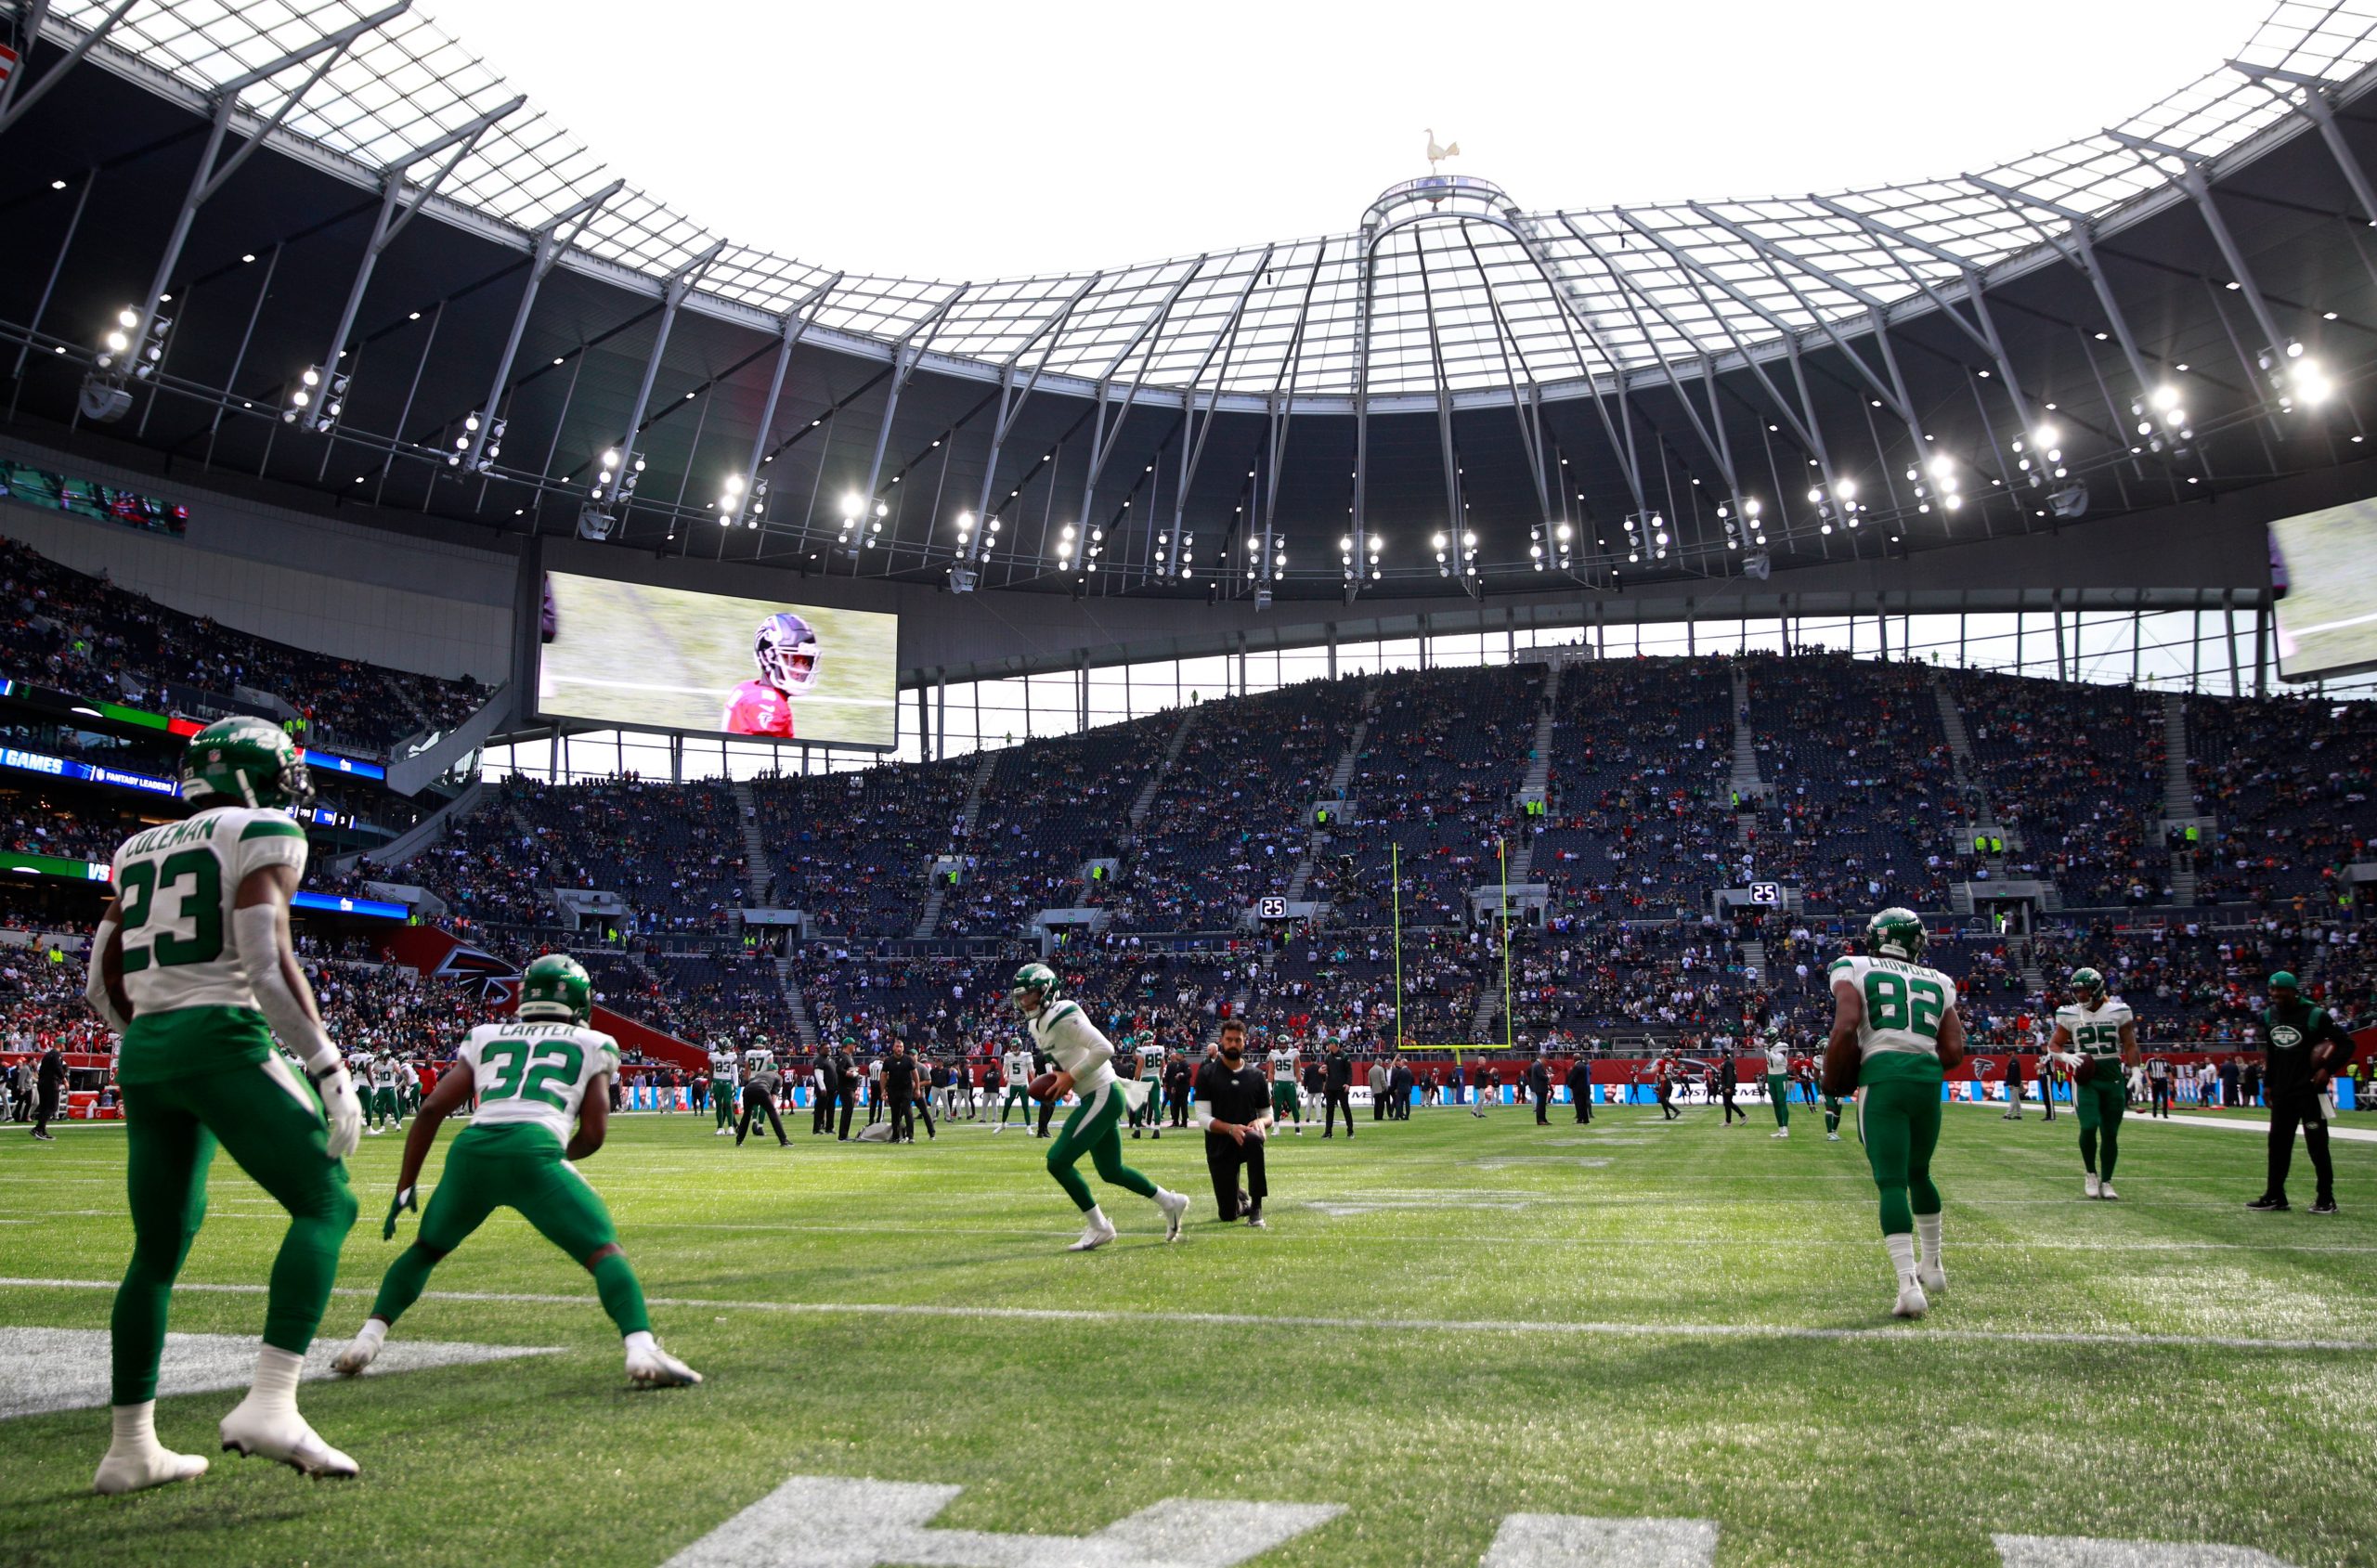 NFL International Series: Why are matches held in London?